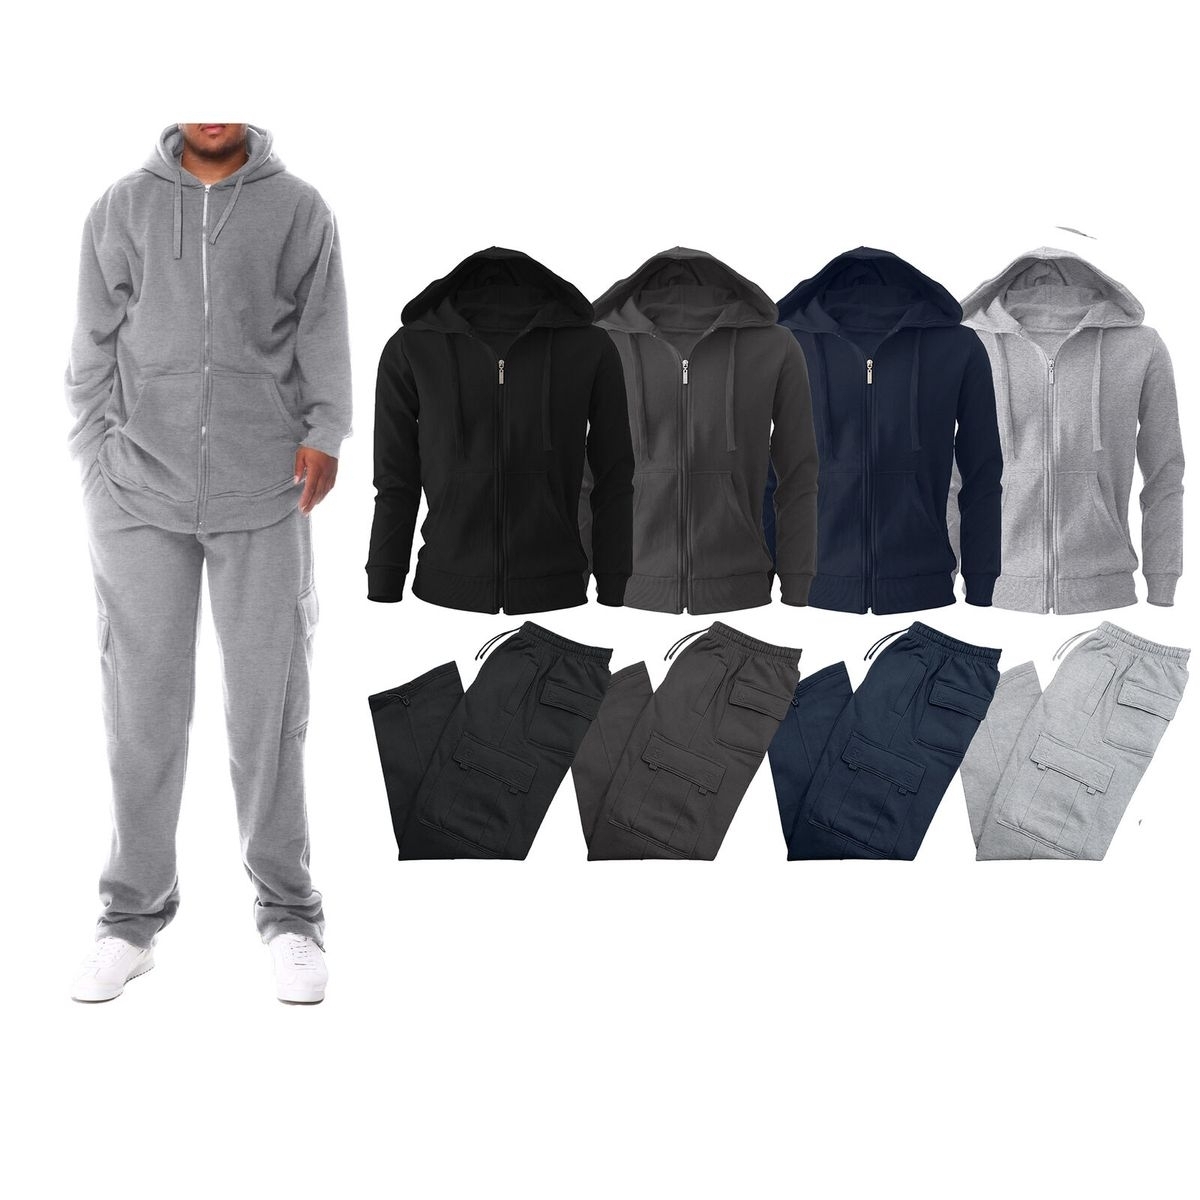 2-Pack: Men's Big & Tall Winter Warm Athletic Active Cozy Fleece Lined Multi-Pocket Full Zip Up Cargo Tracksuit - Charcoal, Large